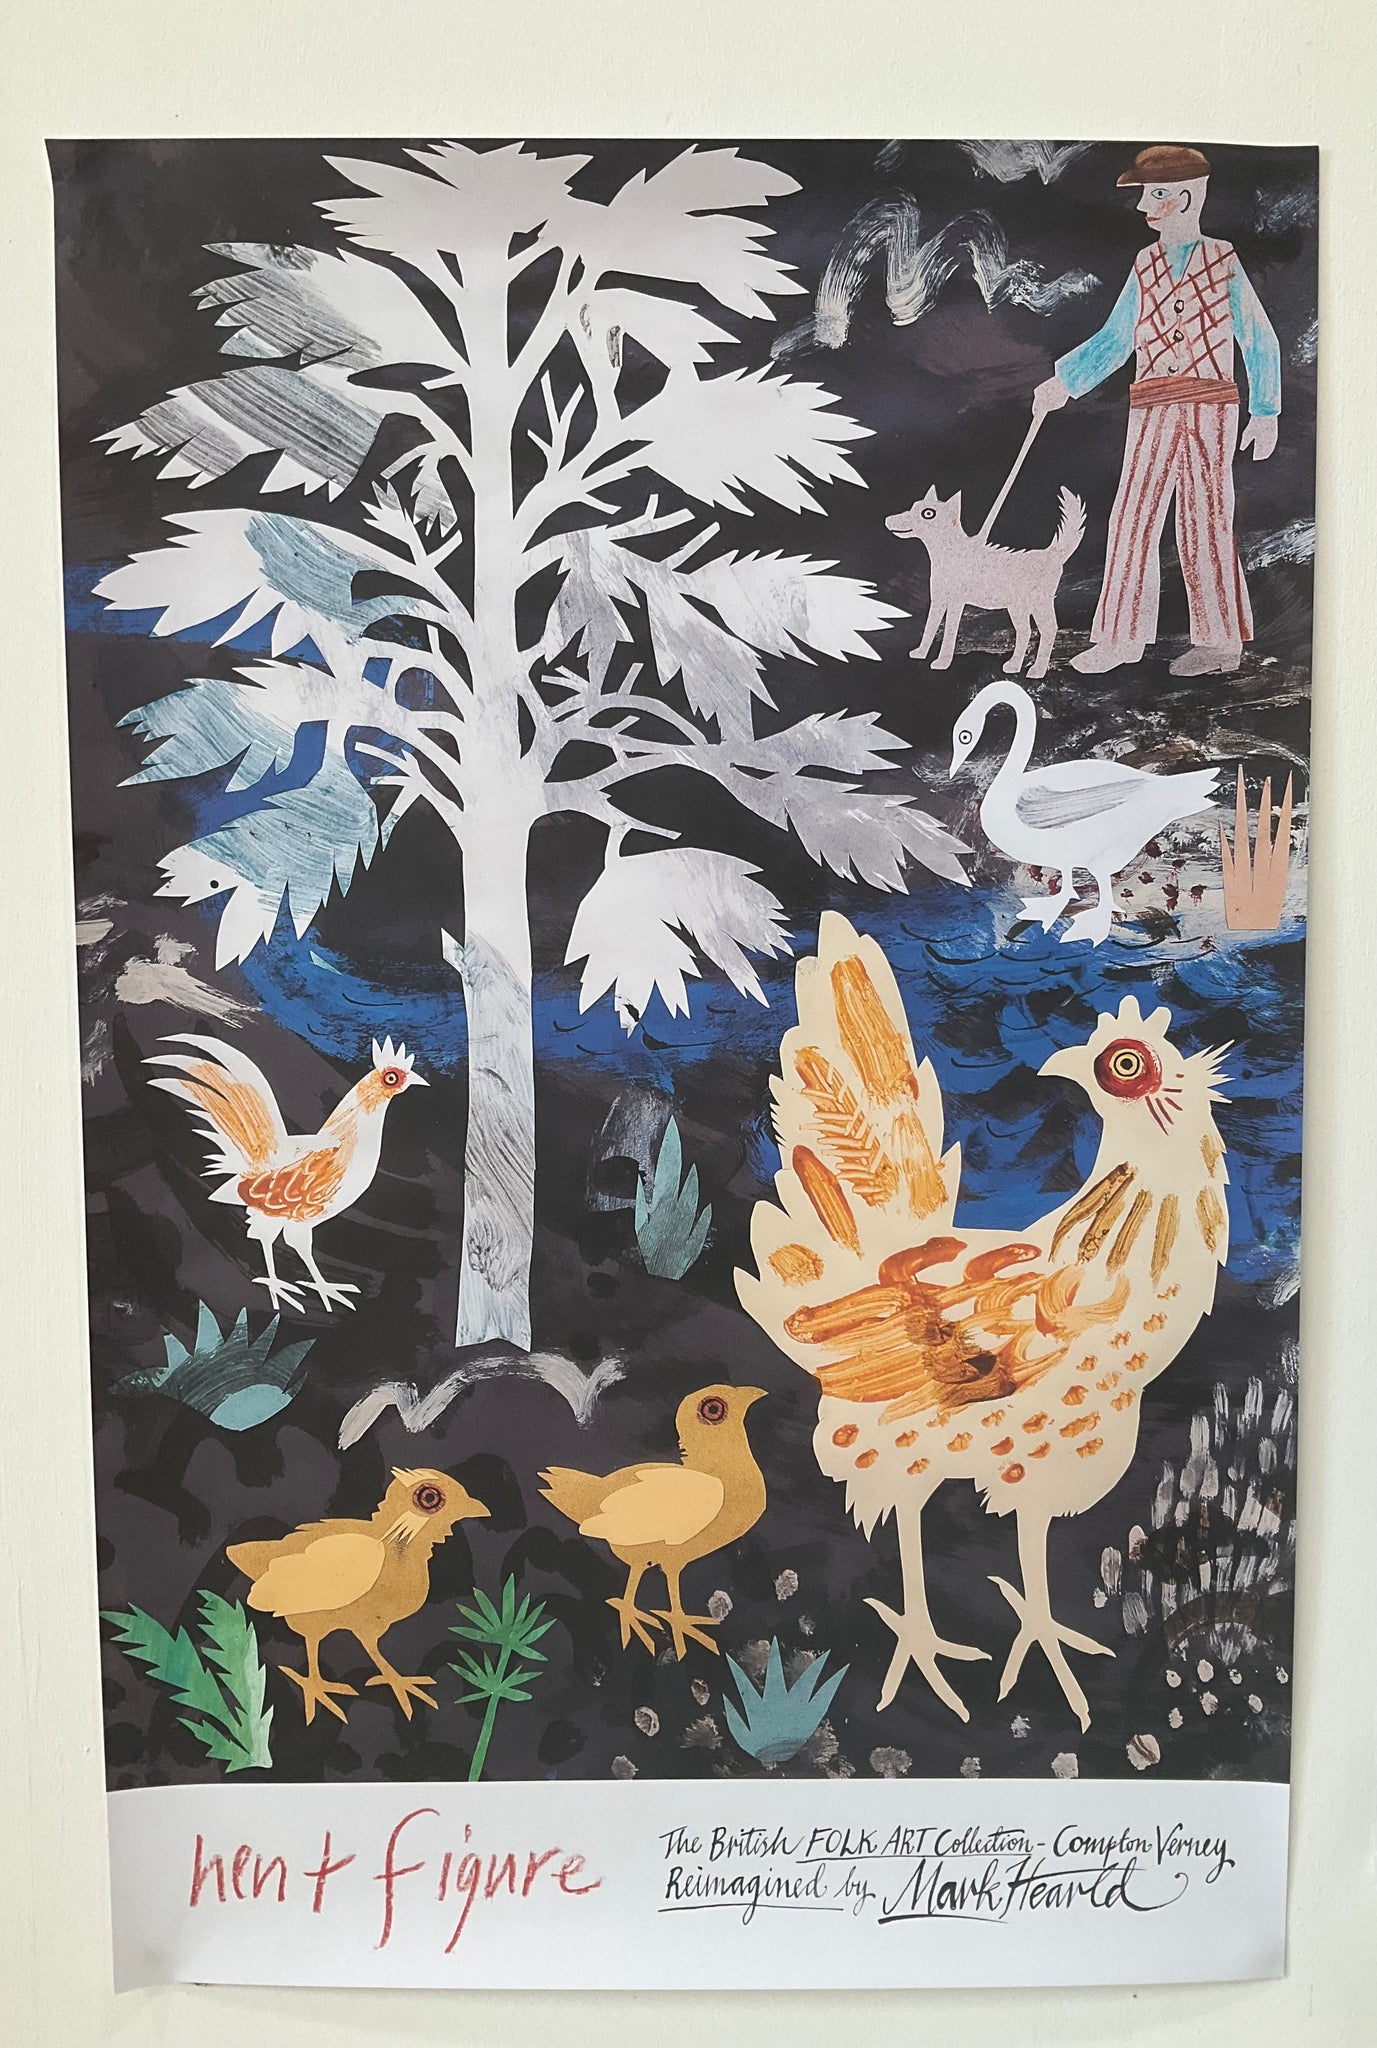 A poster featuring folk artwork by Mark Hearld of a hen, chicks, a tree and a man with his dog, on a dark background.